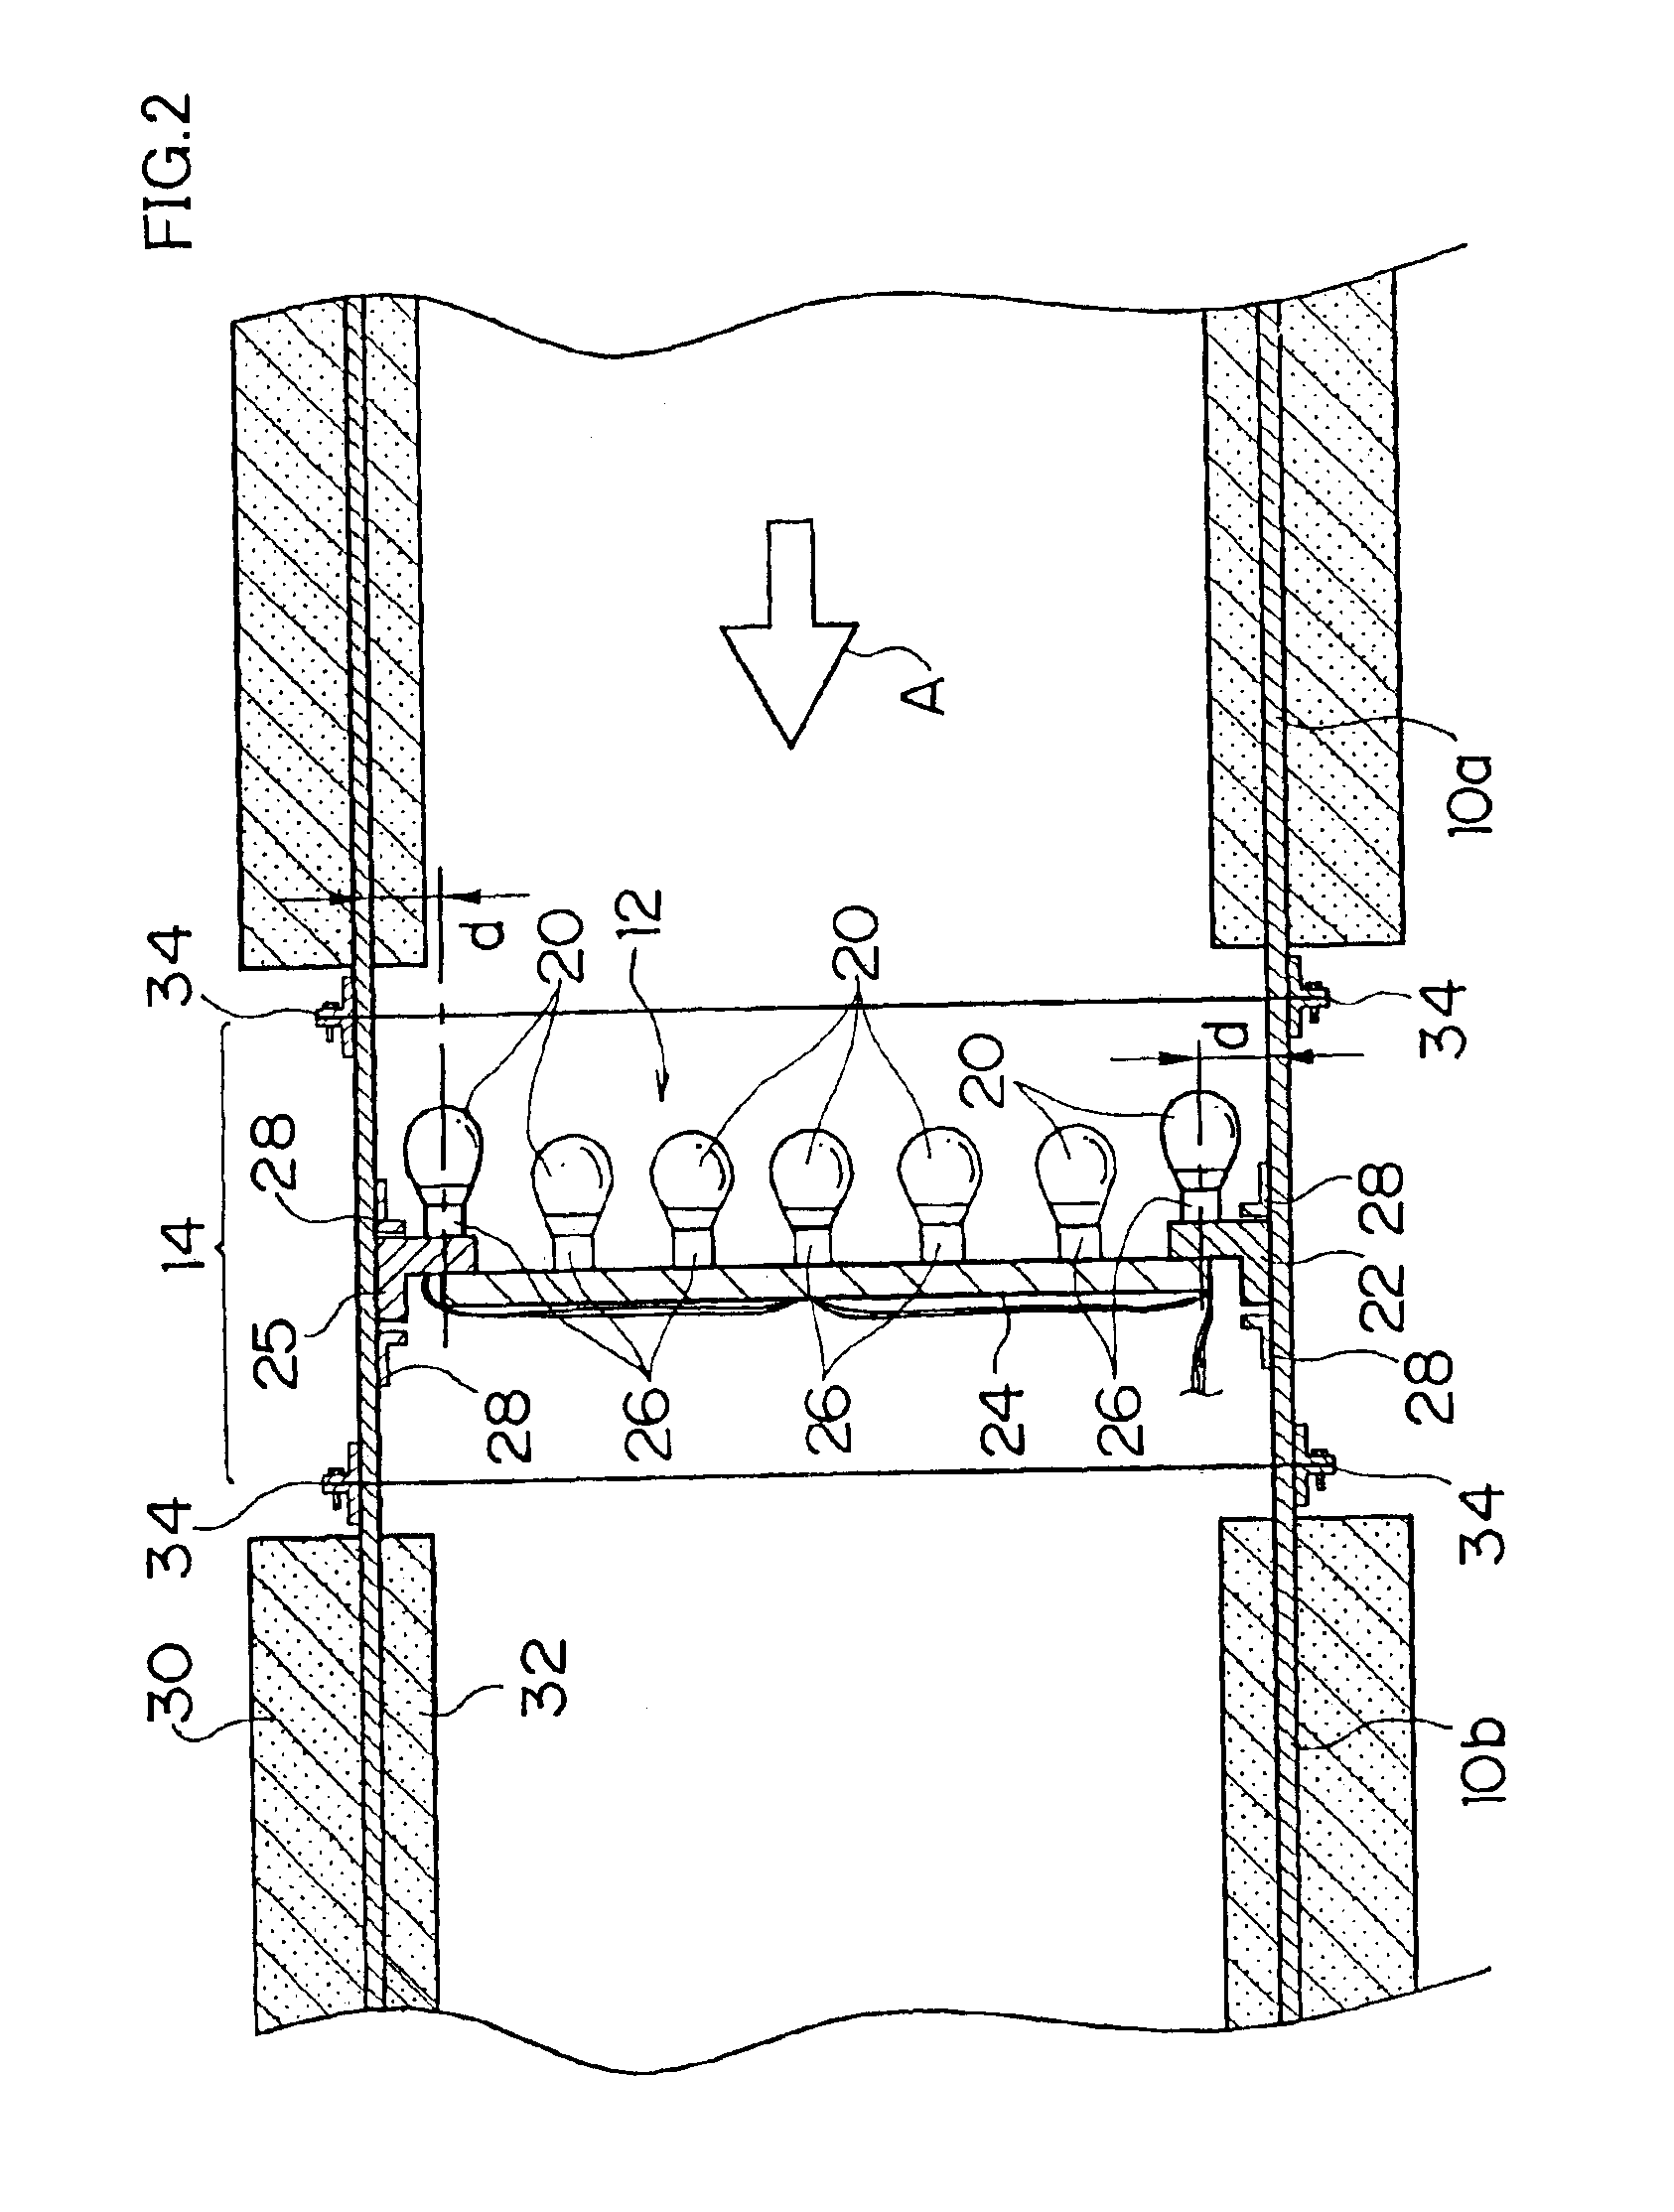 Air-conditioning control apparatus using heater